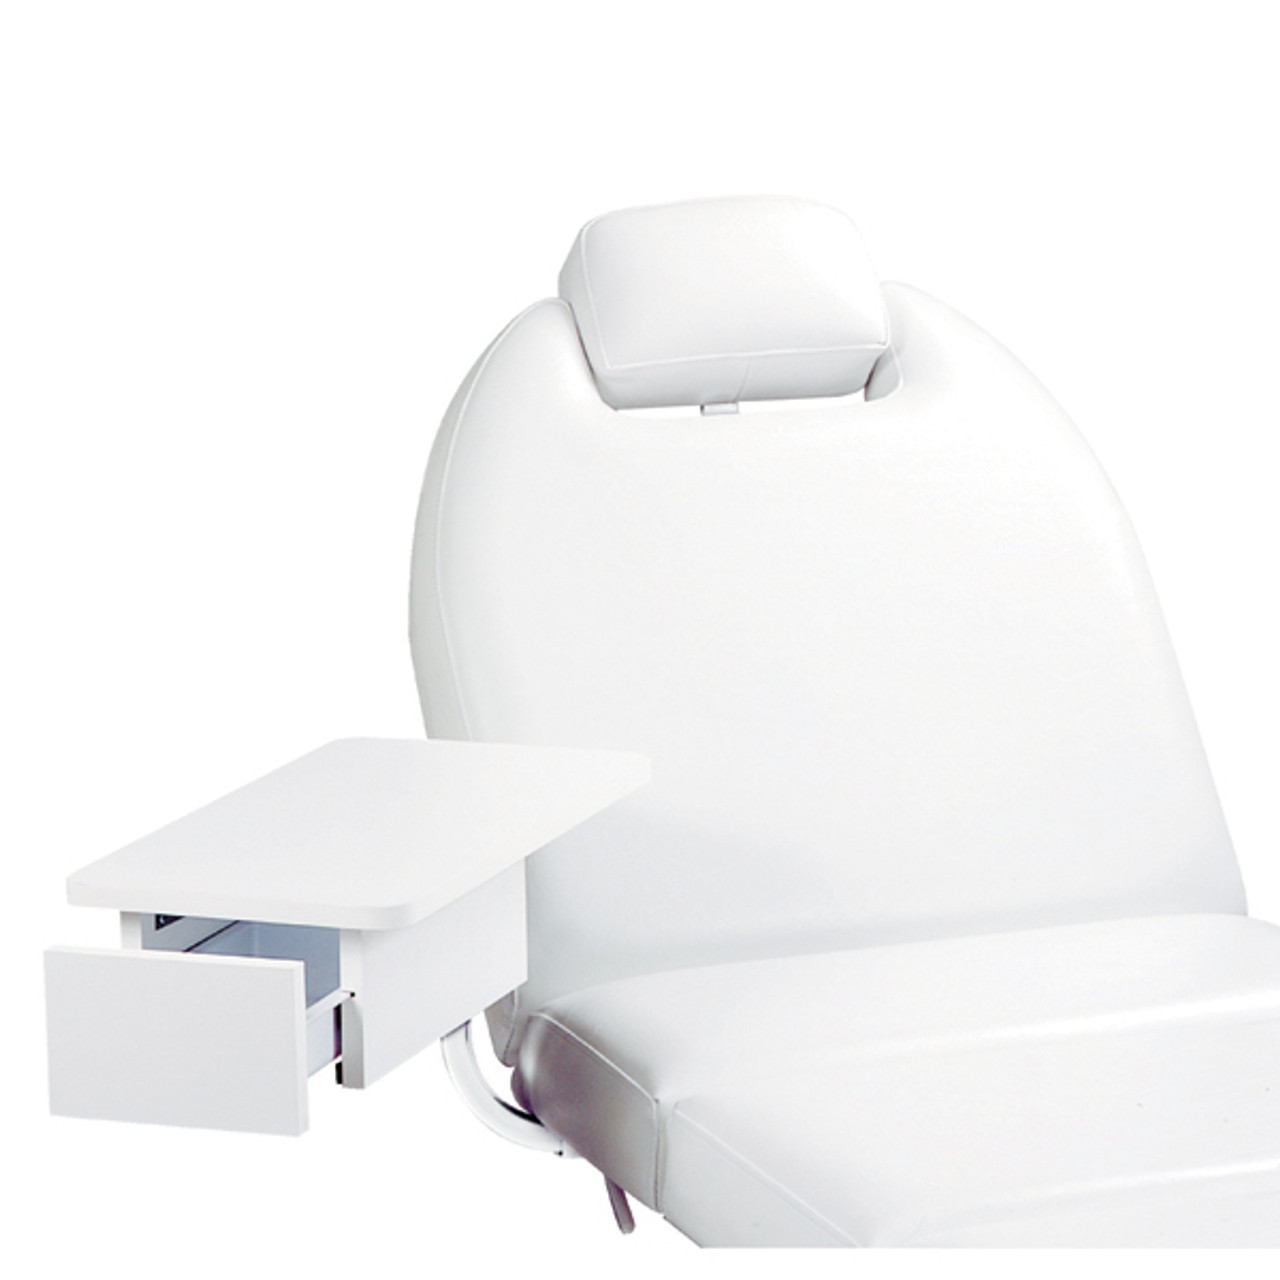 Manicure Support For Facial Beds by Equipro